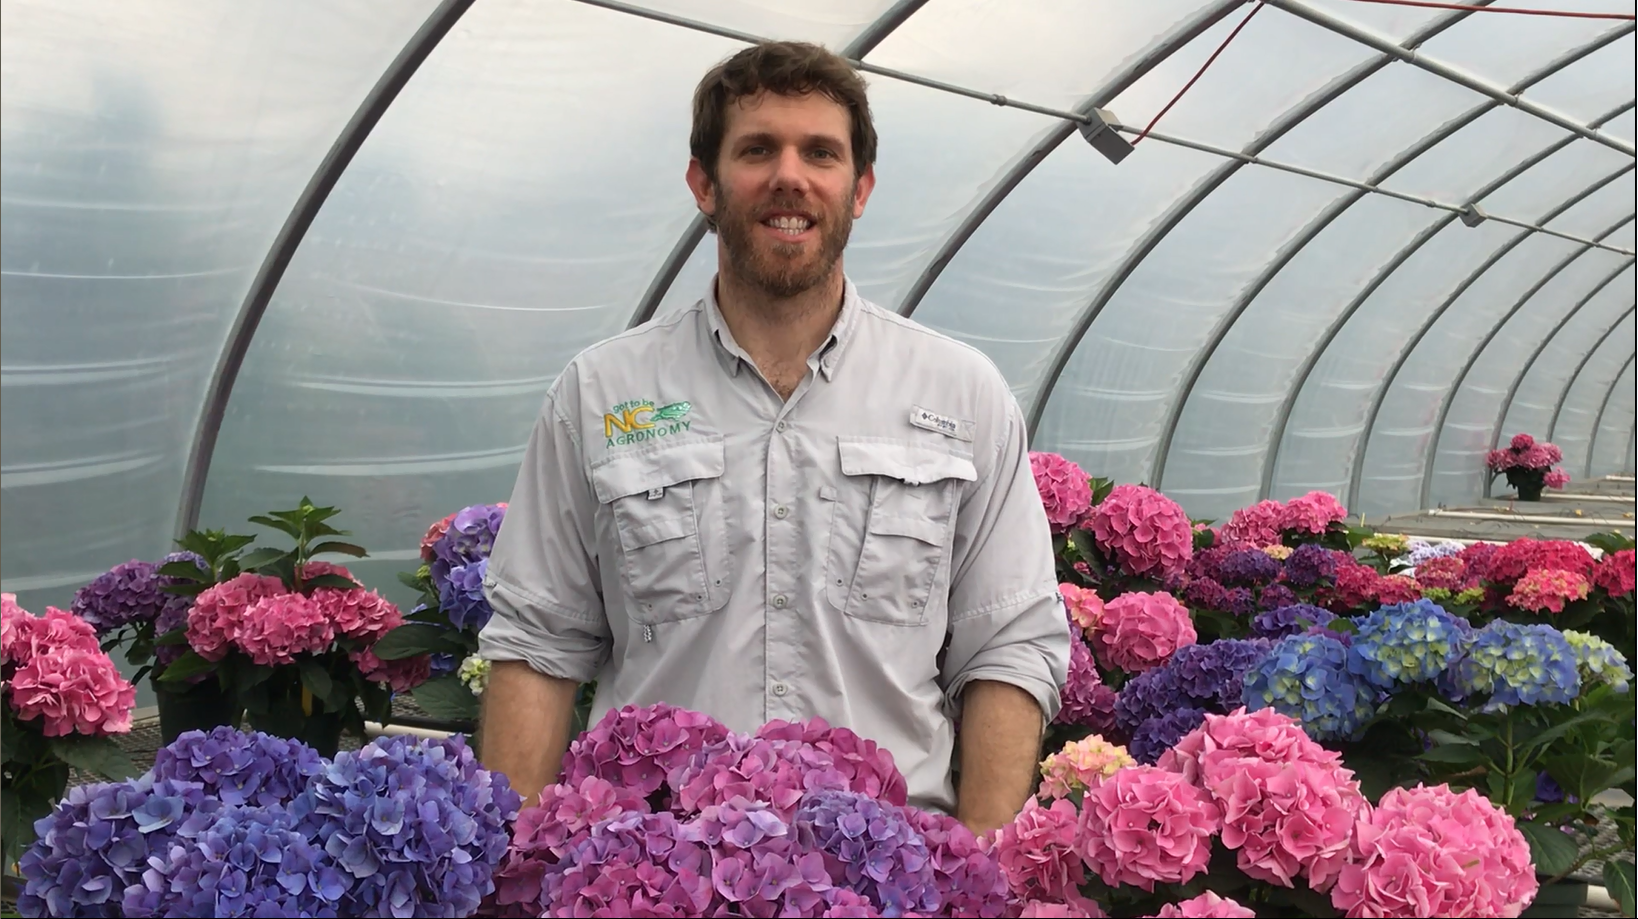 Man standing in a greenhouse filled with pink, purple, and blue hydrangeas